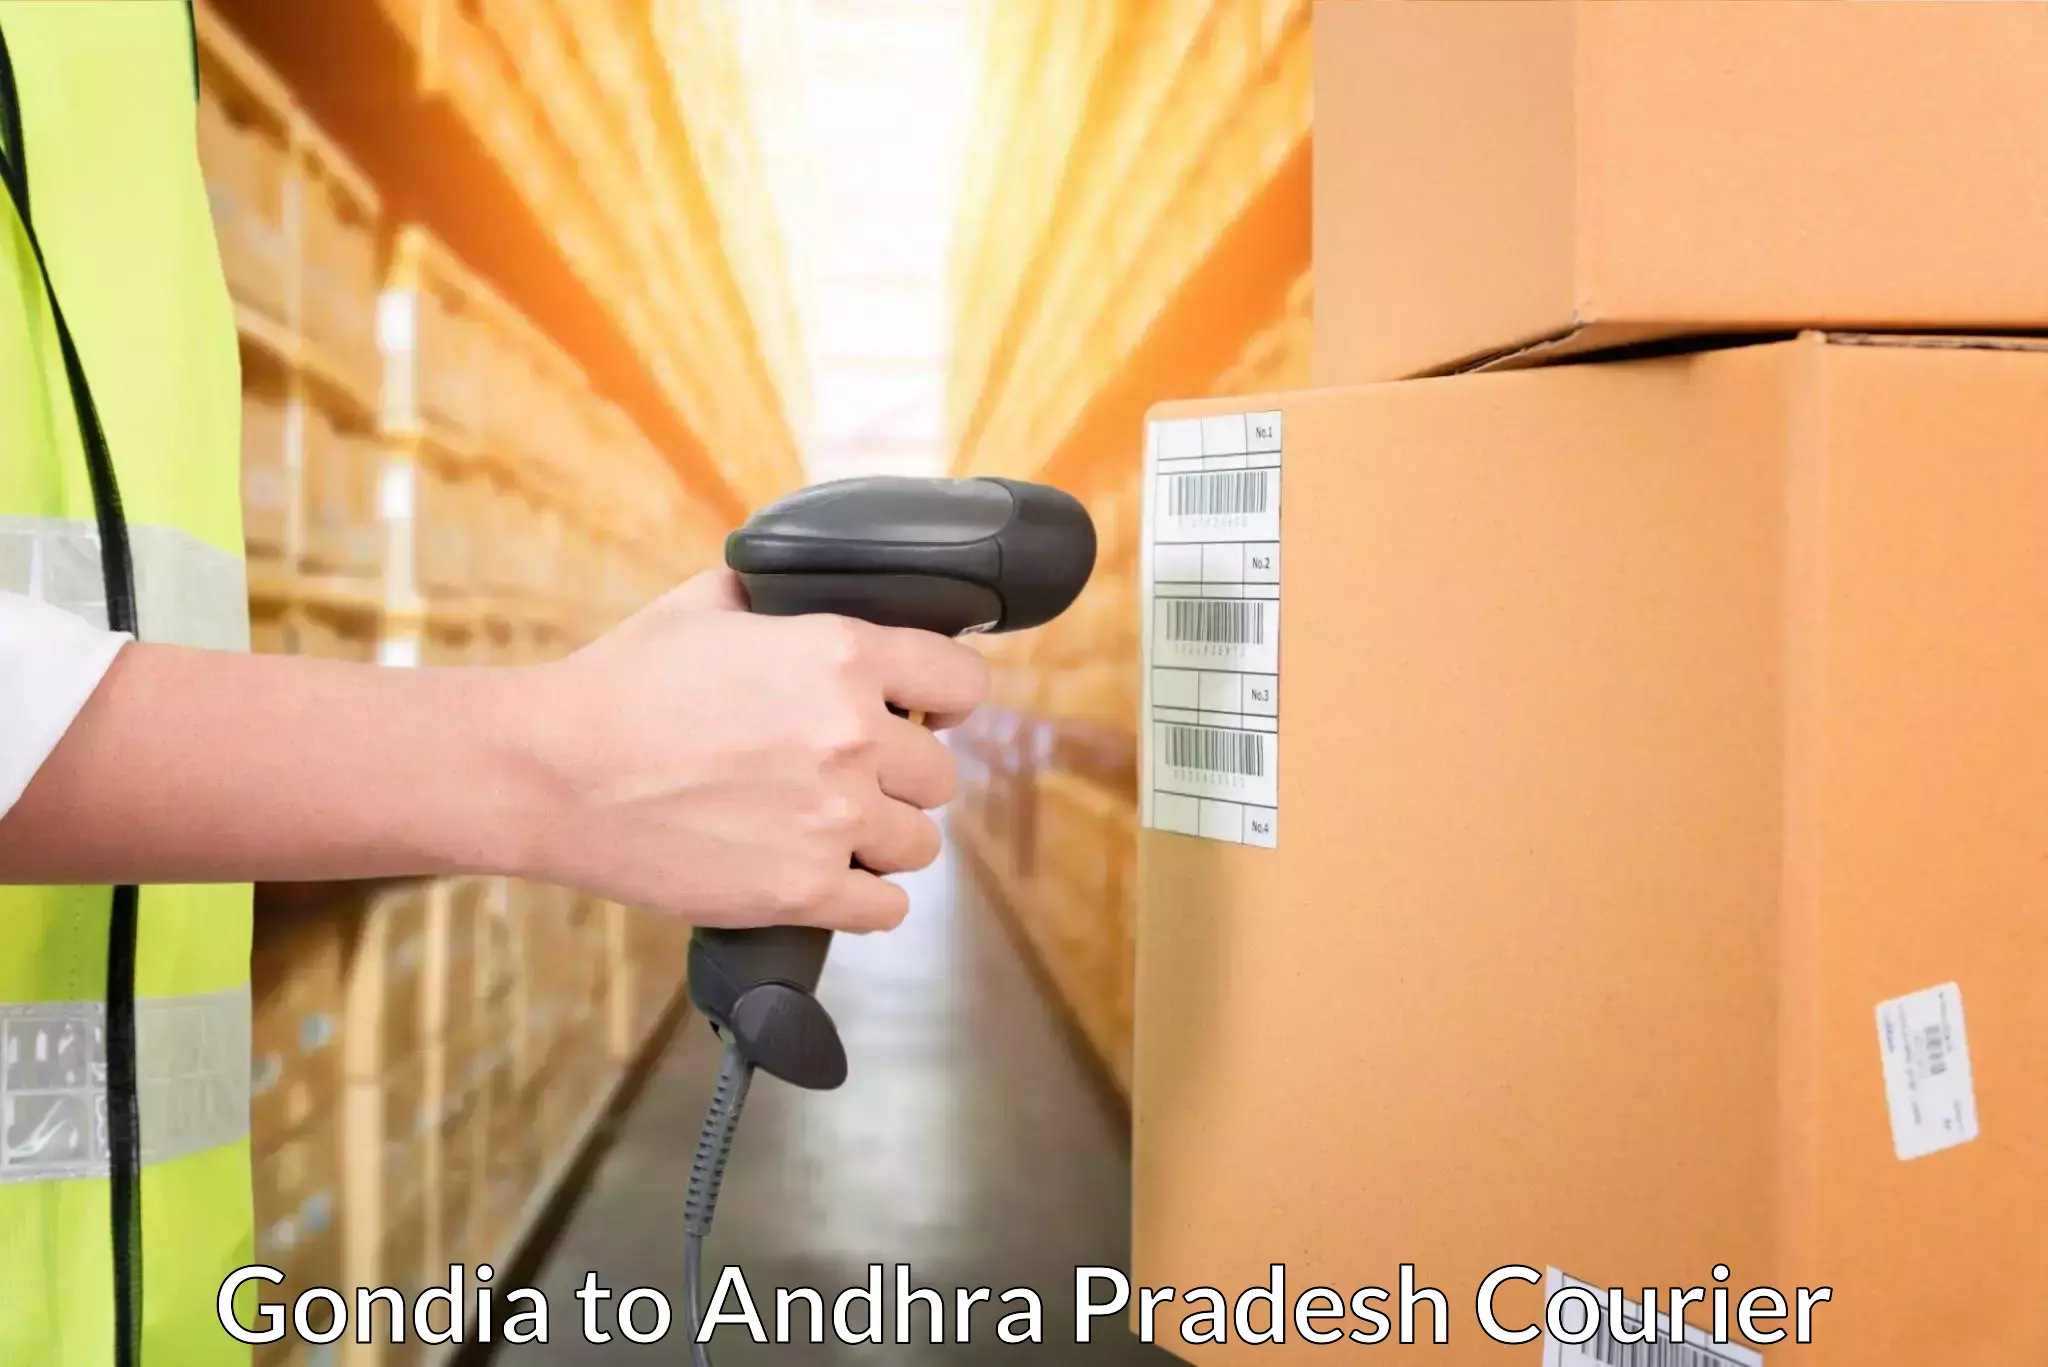 Supply chain delivery Gondia to Mangalagiri